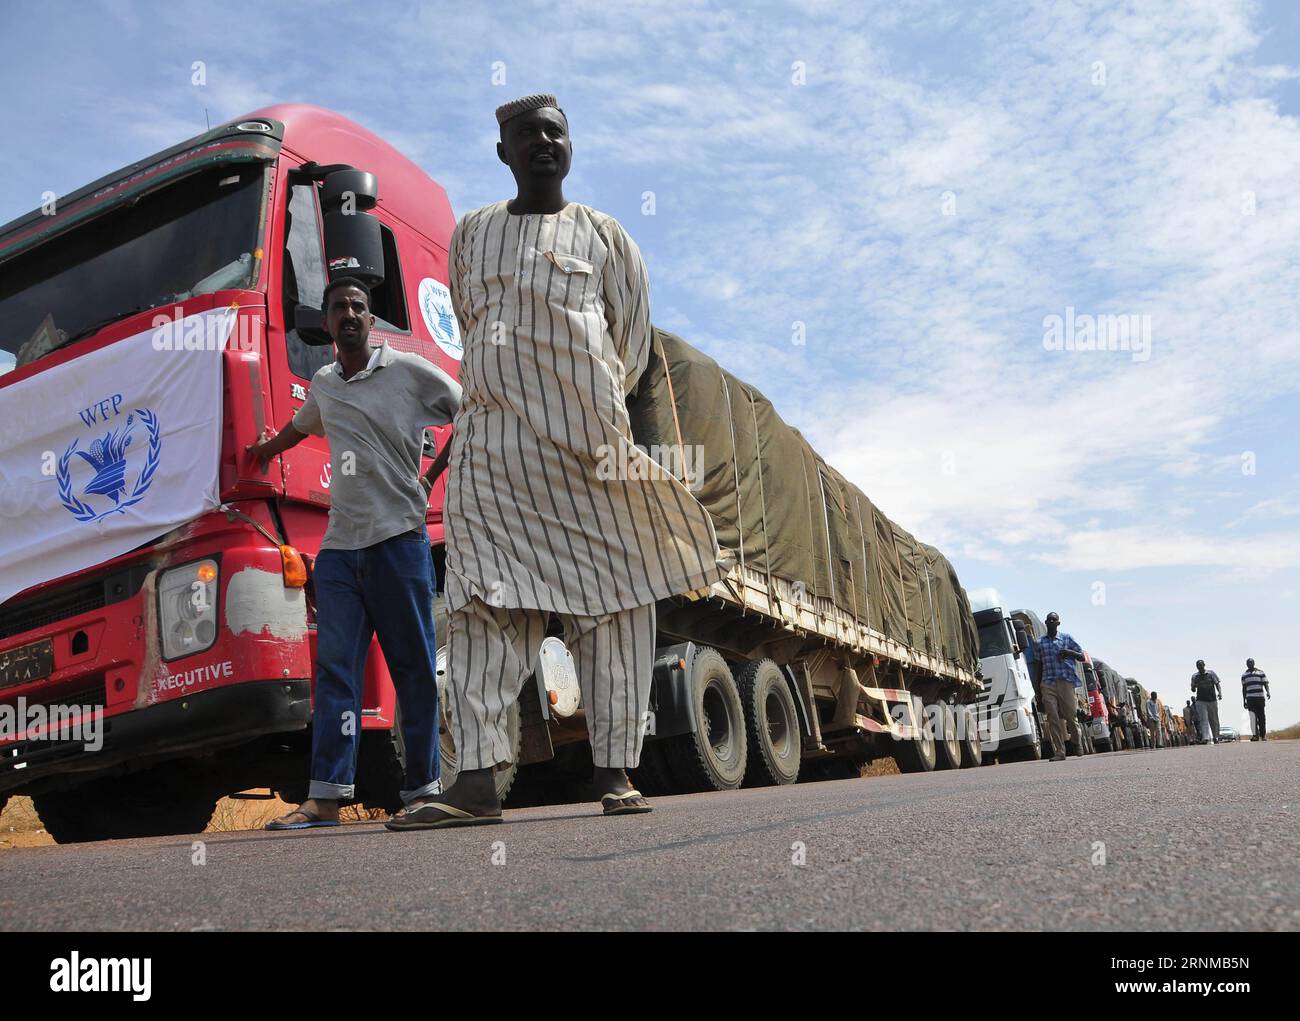 Bilder des Tages (170520) -- KHARTOUM, May 20, 2017 -- Convoys carrying food materials are seen through the humanitarian corridor from Sudan s El Obied to Bentiu in Bahr el Ghazal State of South Soudan, May 19, 2017. The humanitarian corridors recently opened by Sudan government have contributed to the delivery of humanitarian aid to South Sudanese citizens and to lessening the famine there, according to aid organizations. ) (gj) SUDAN-HUMANITARIAN CORRIDORS-SOUTH SUDAN MohamedxBabiker PUBLICATIONxNOTxINxCHN   Images the Day  Khartoum May 20 2017 convoys carrying Food Material are Lakes Throug Stock Photo